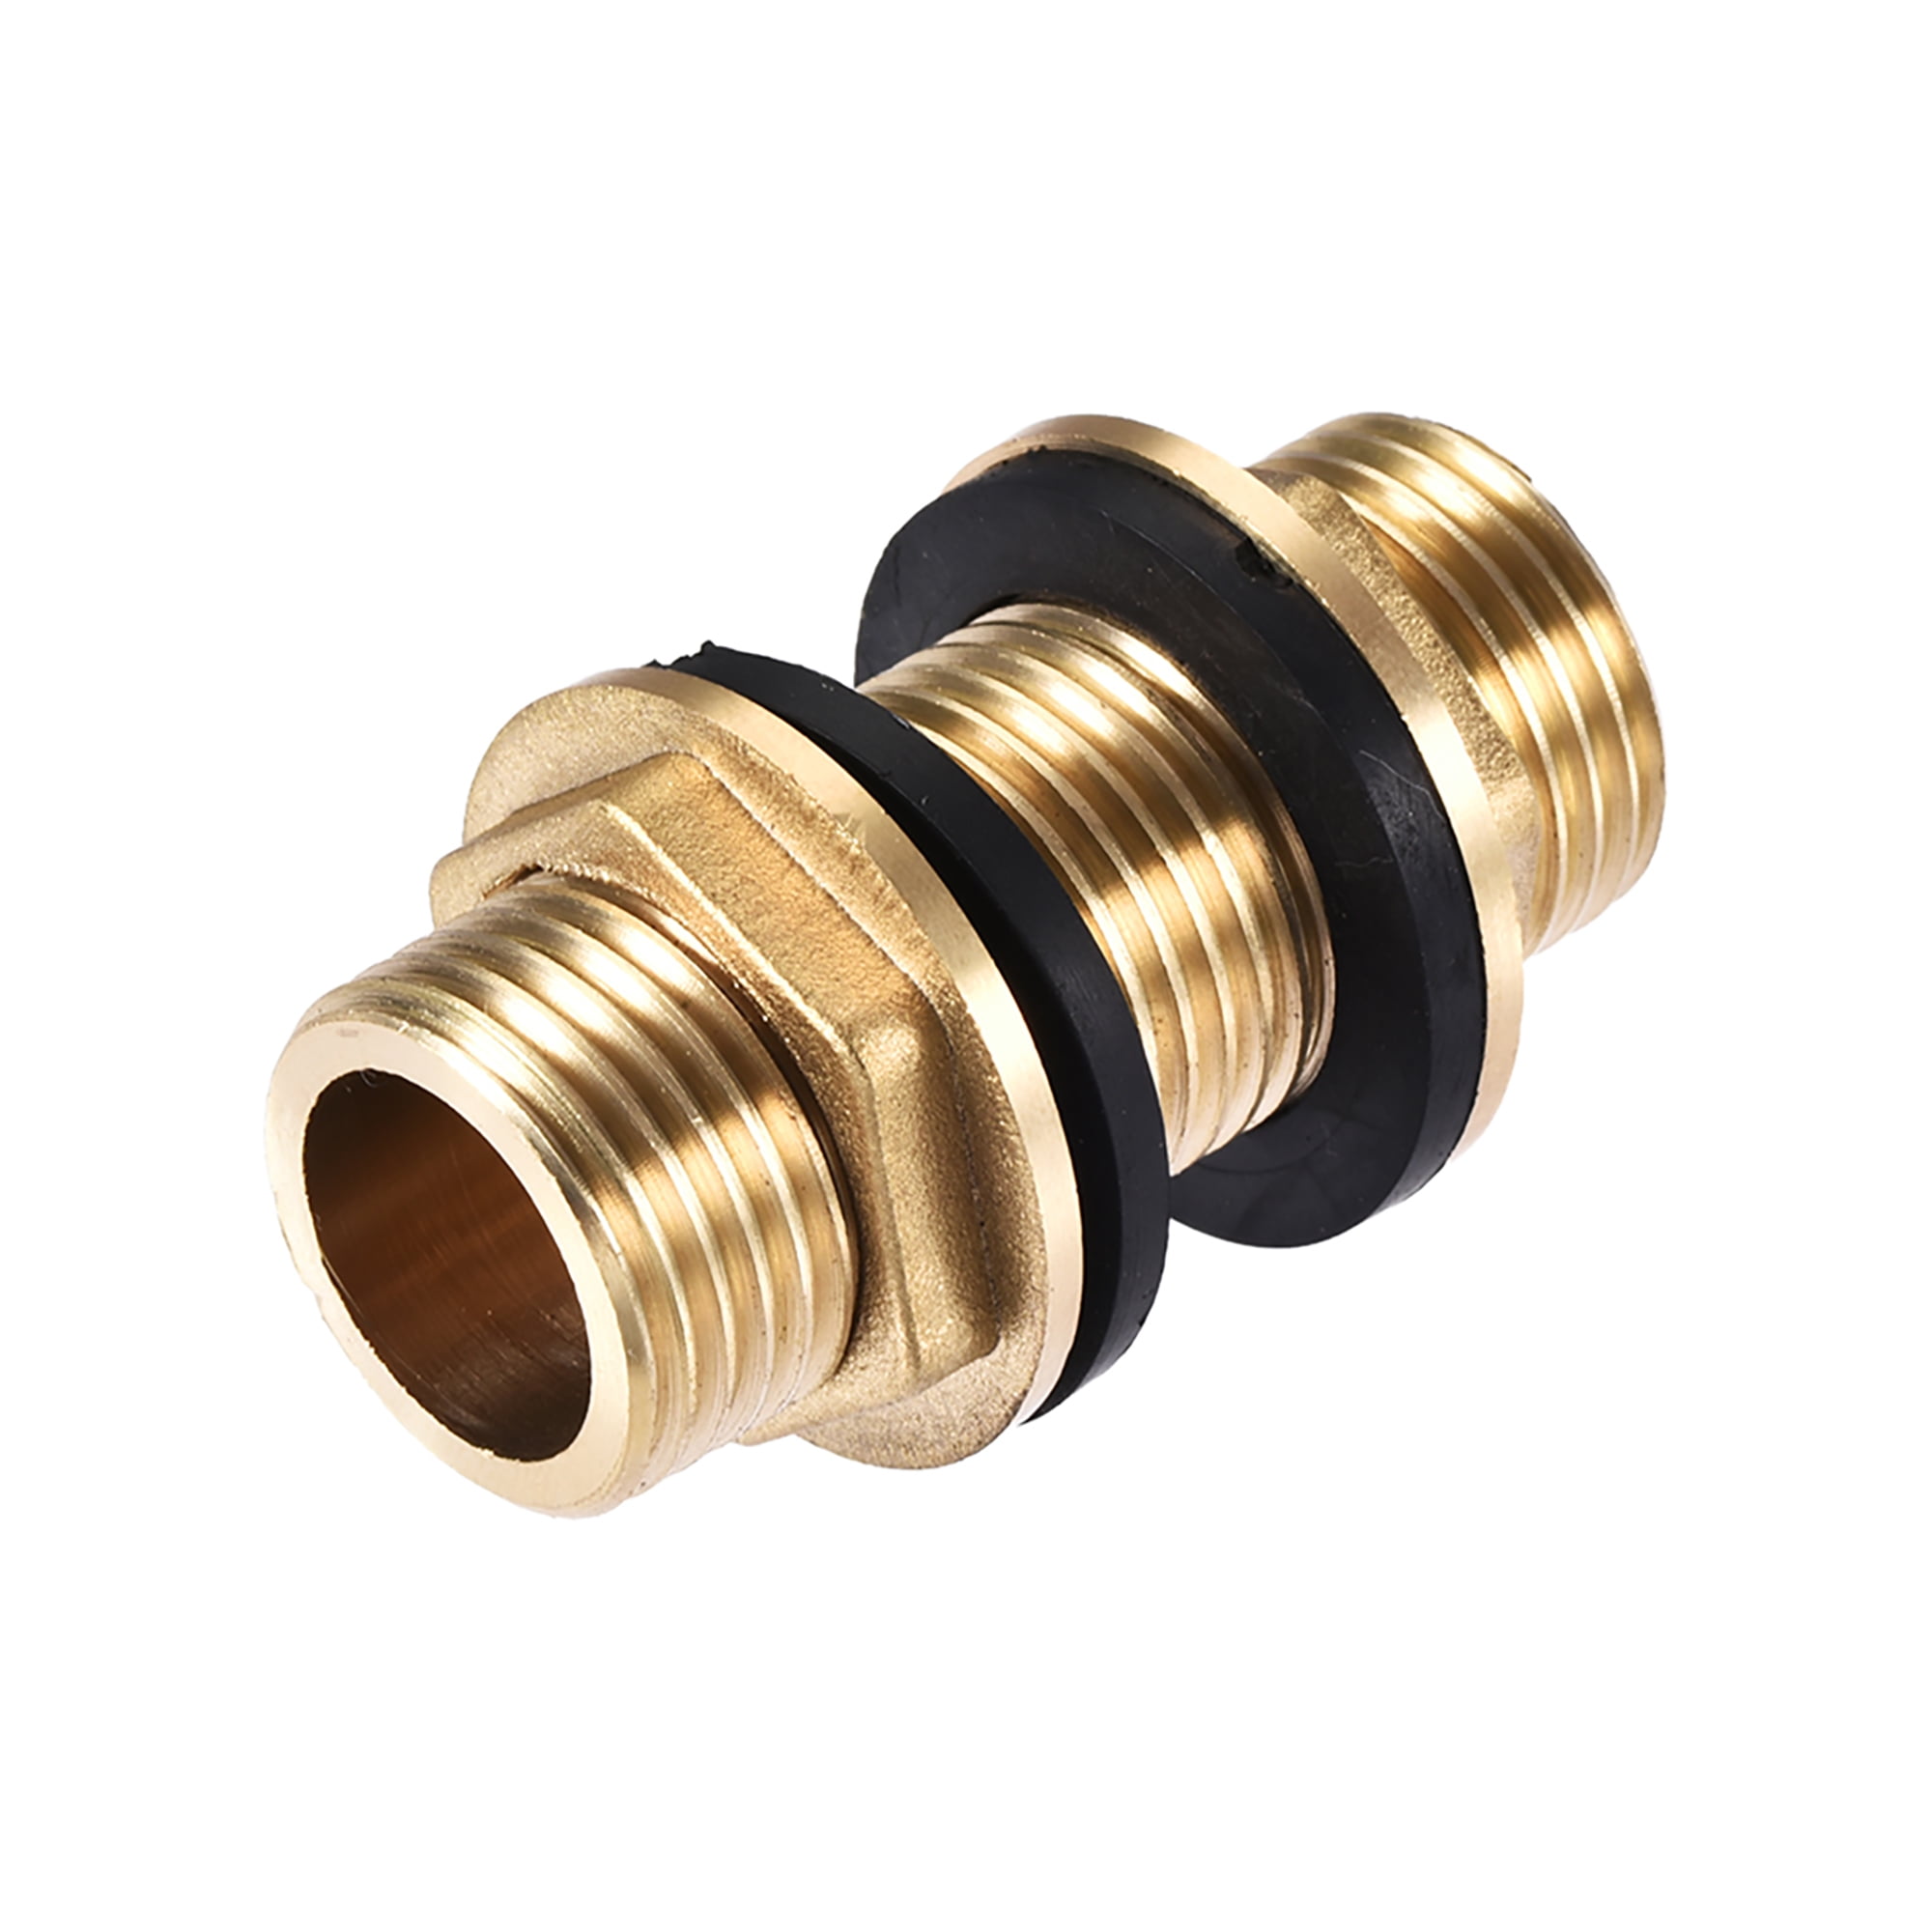 Uxcell 6mm Tube Brass Compression Fittings, 2 Pack Insert Compression  Sleeve Fitting